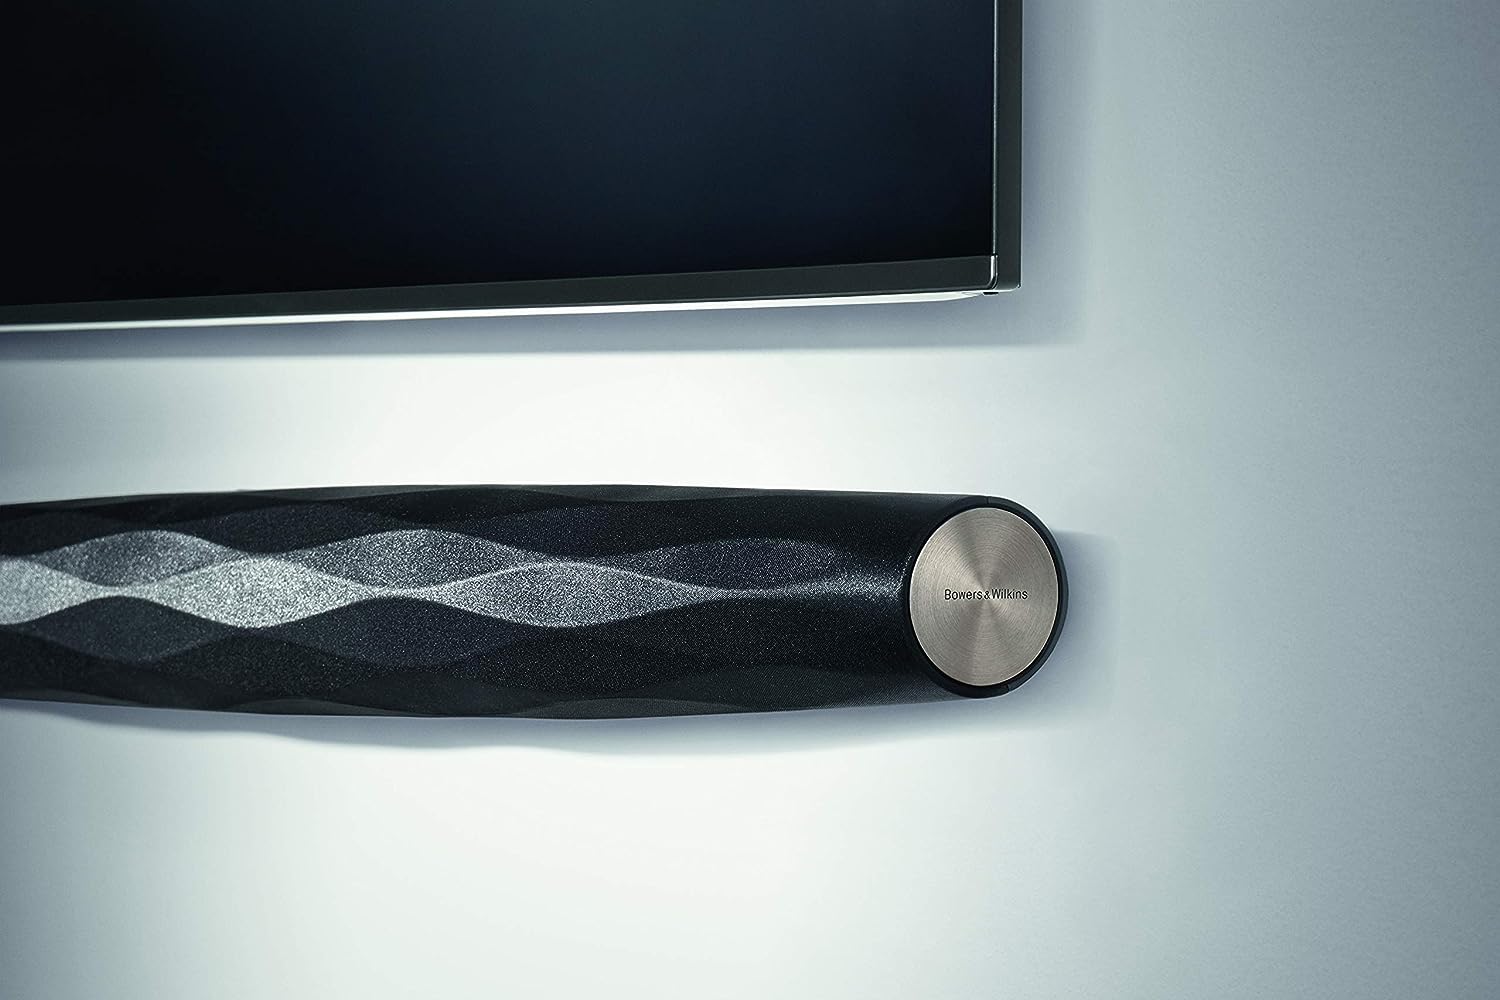 Bowers & Wilkins Formation Bar TV Sound Bar/Wireless Music System with Apple AirPlay 2 and Bluetooth